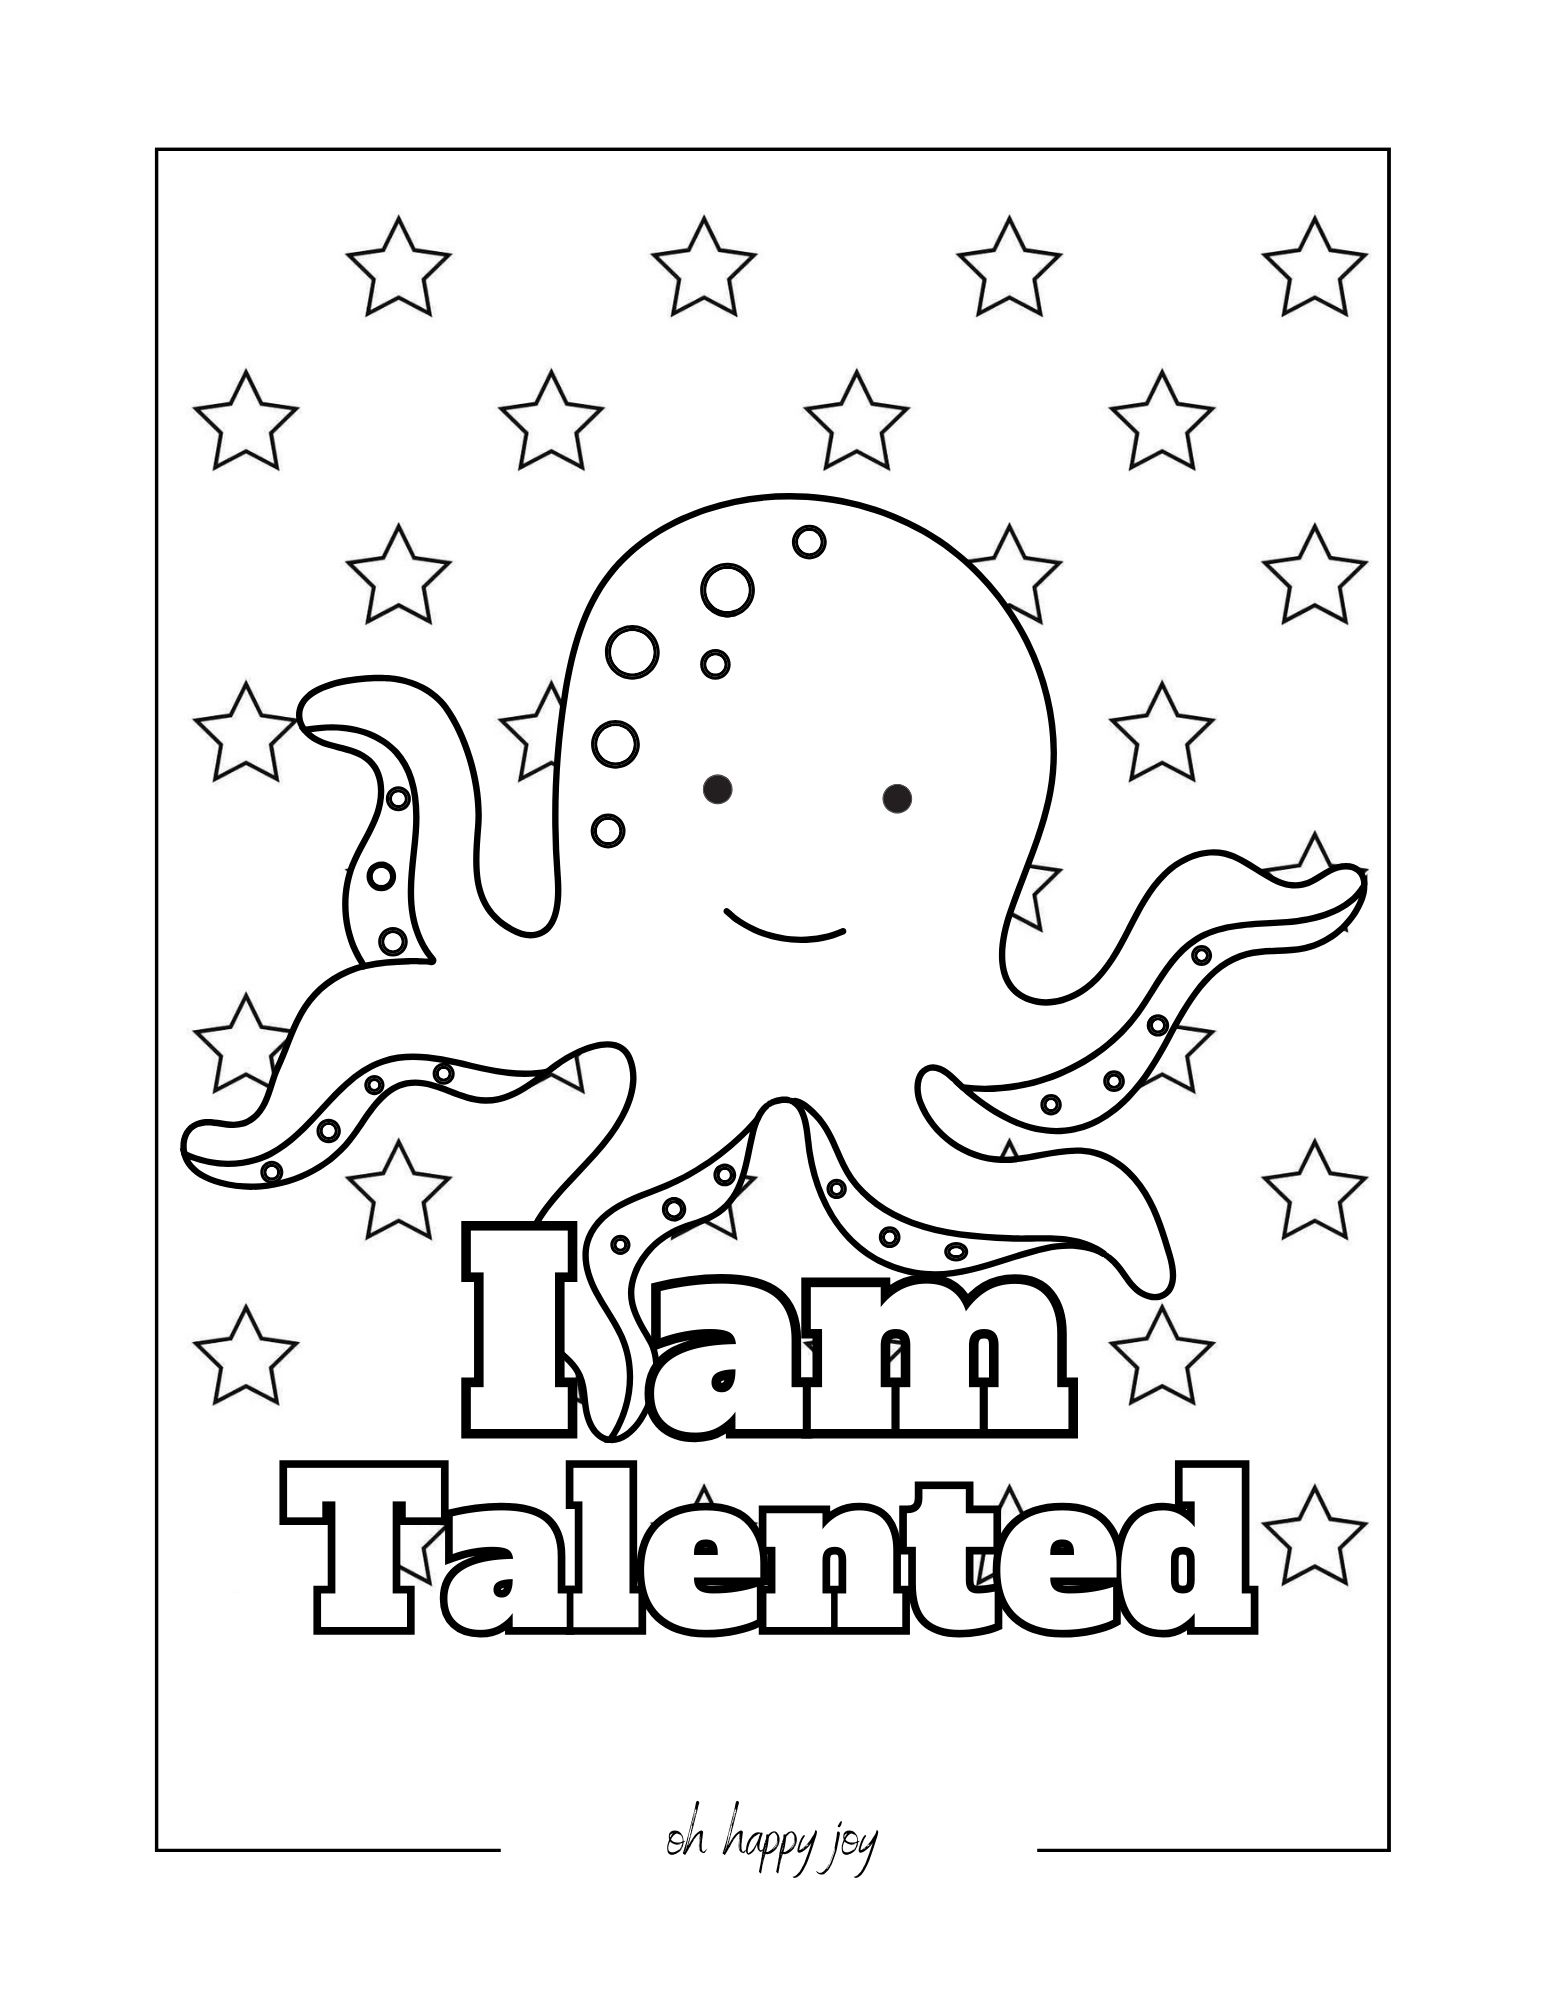 I am talented affirmation coloring page